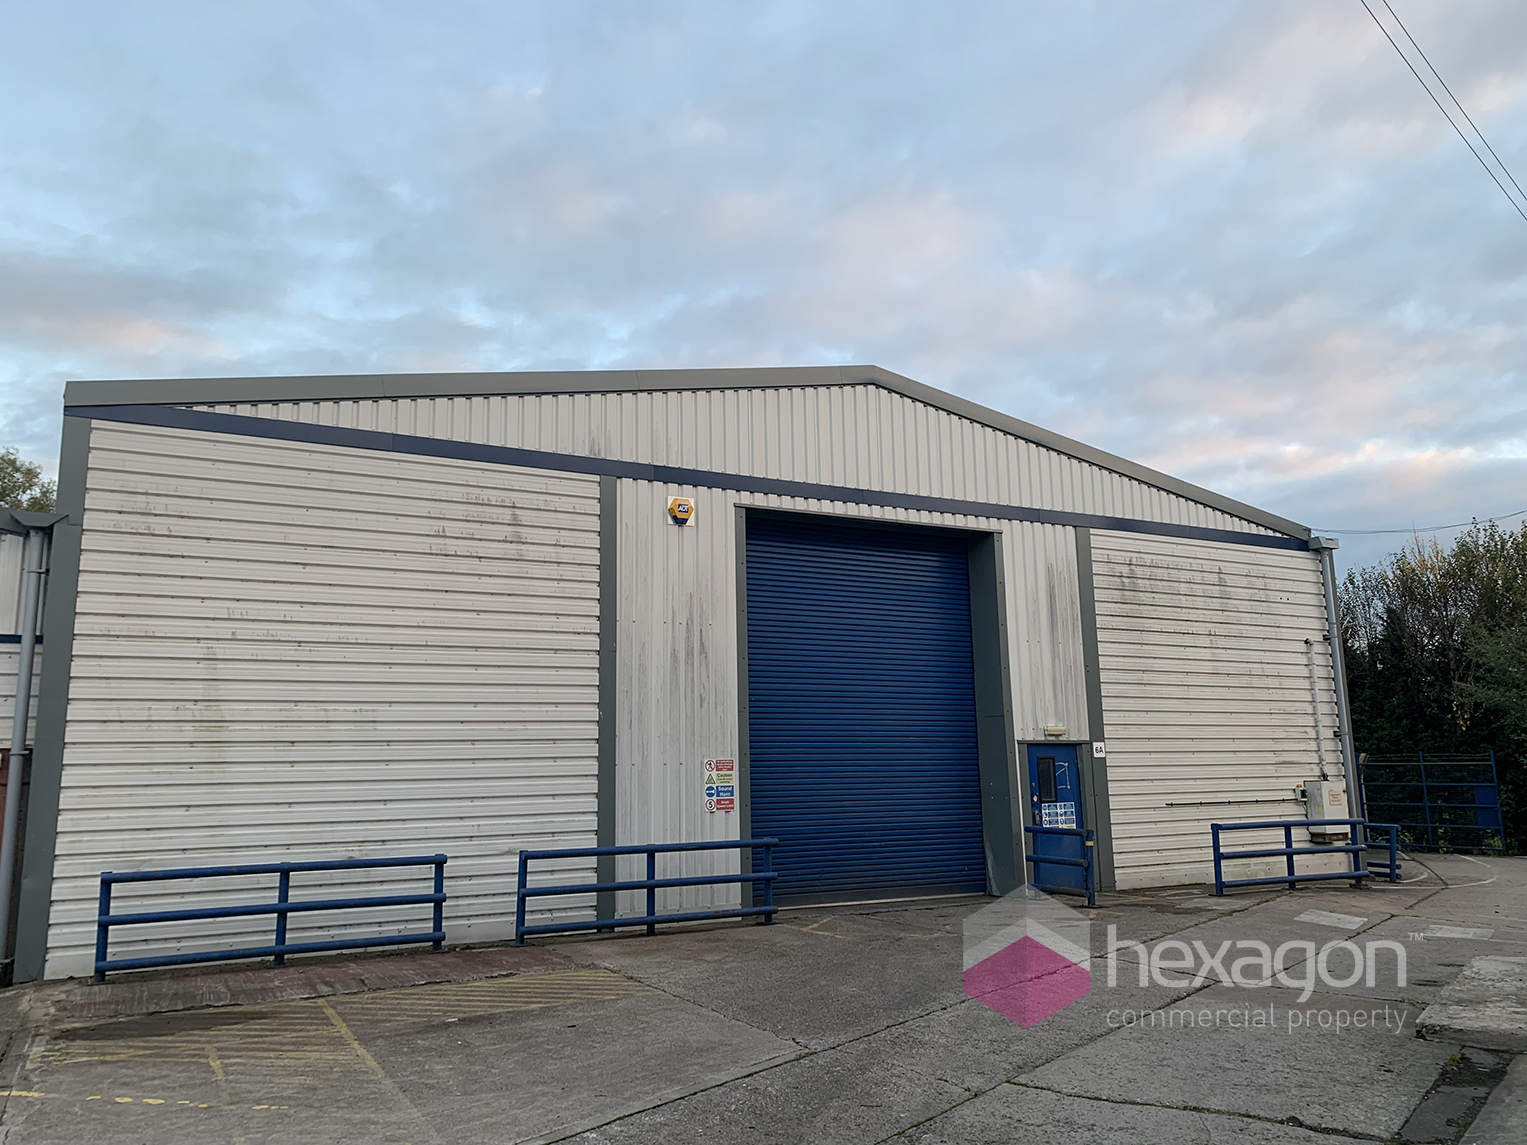 0 bed Light Industrial for rent in Bromyard. From Hexagon Commercial Property